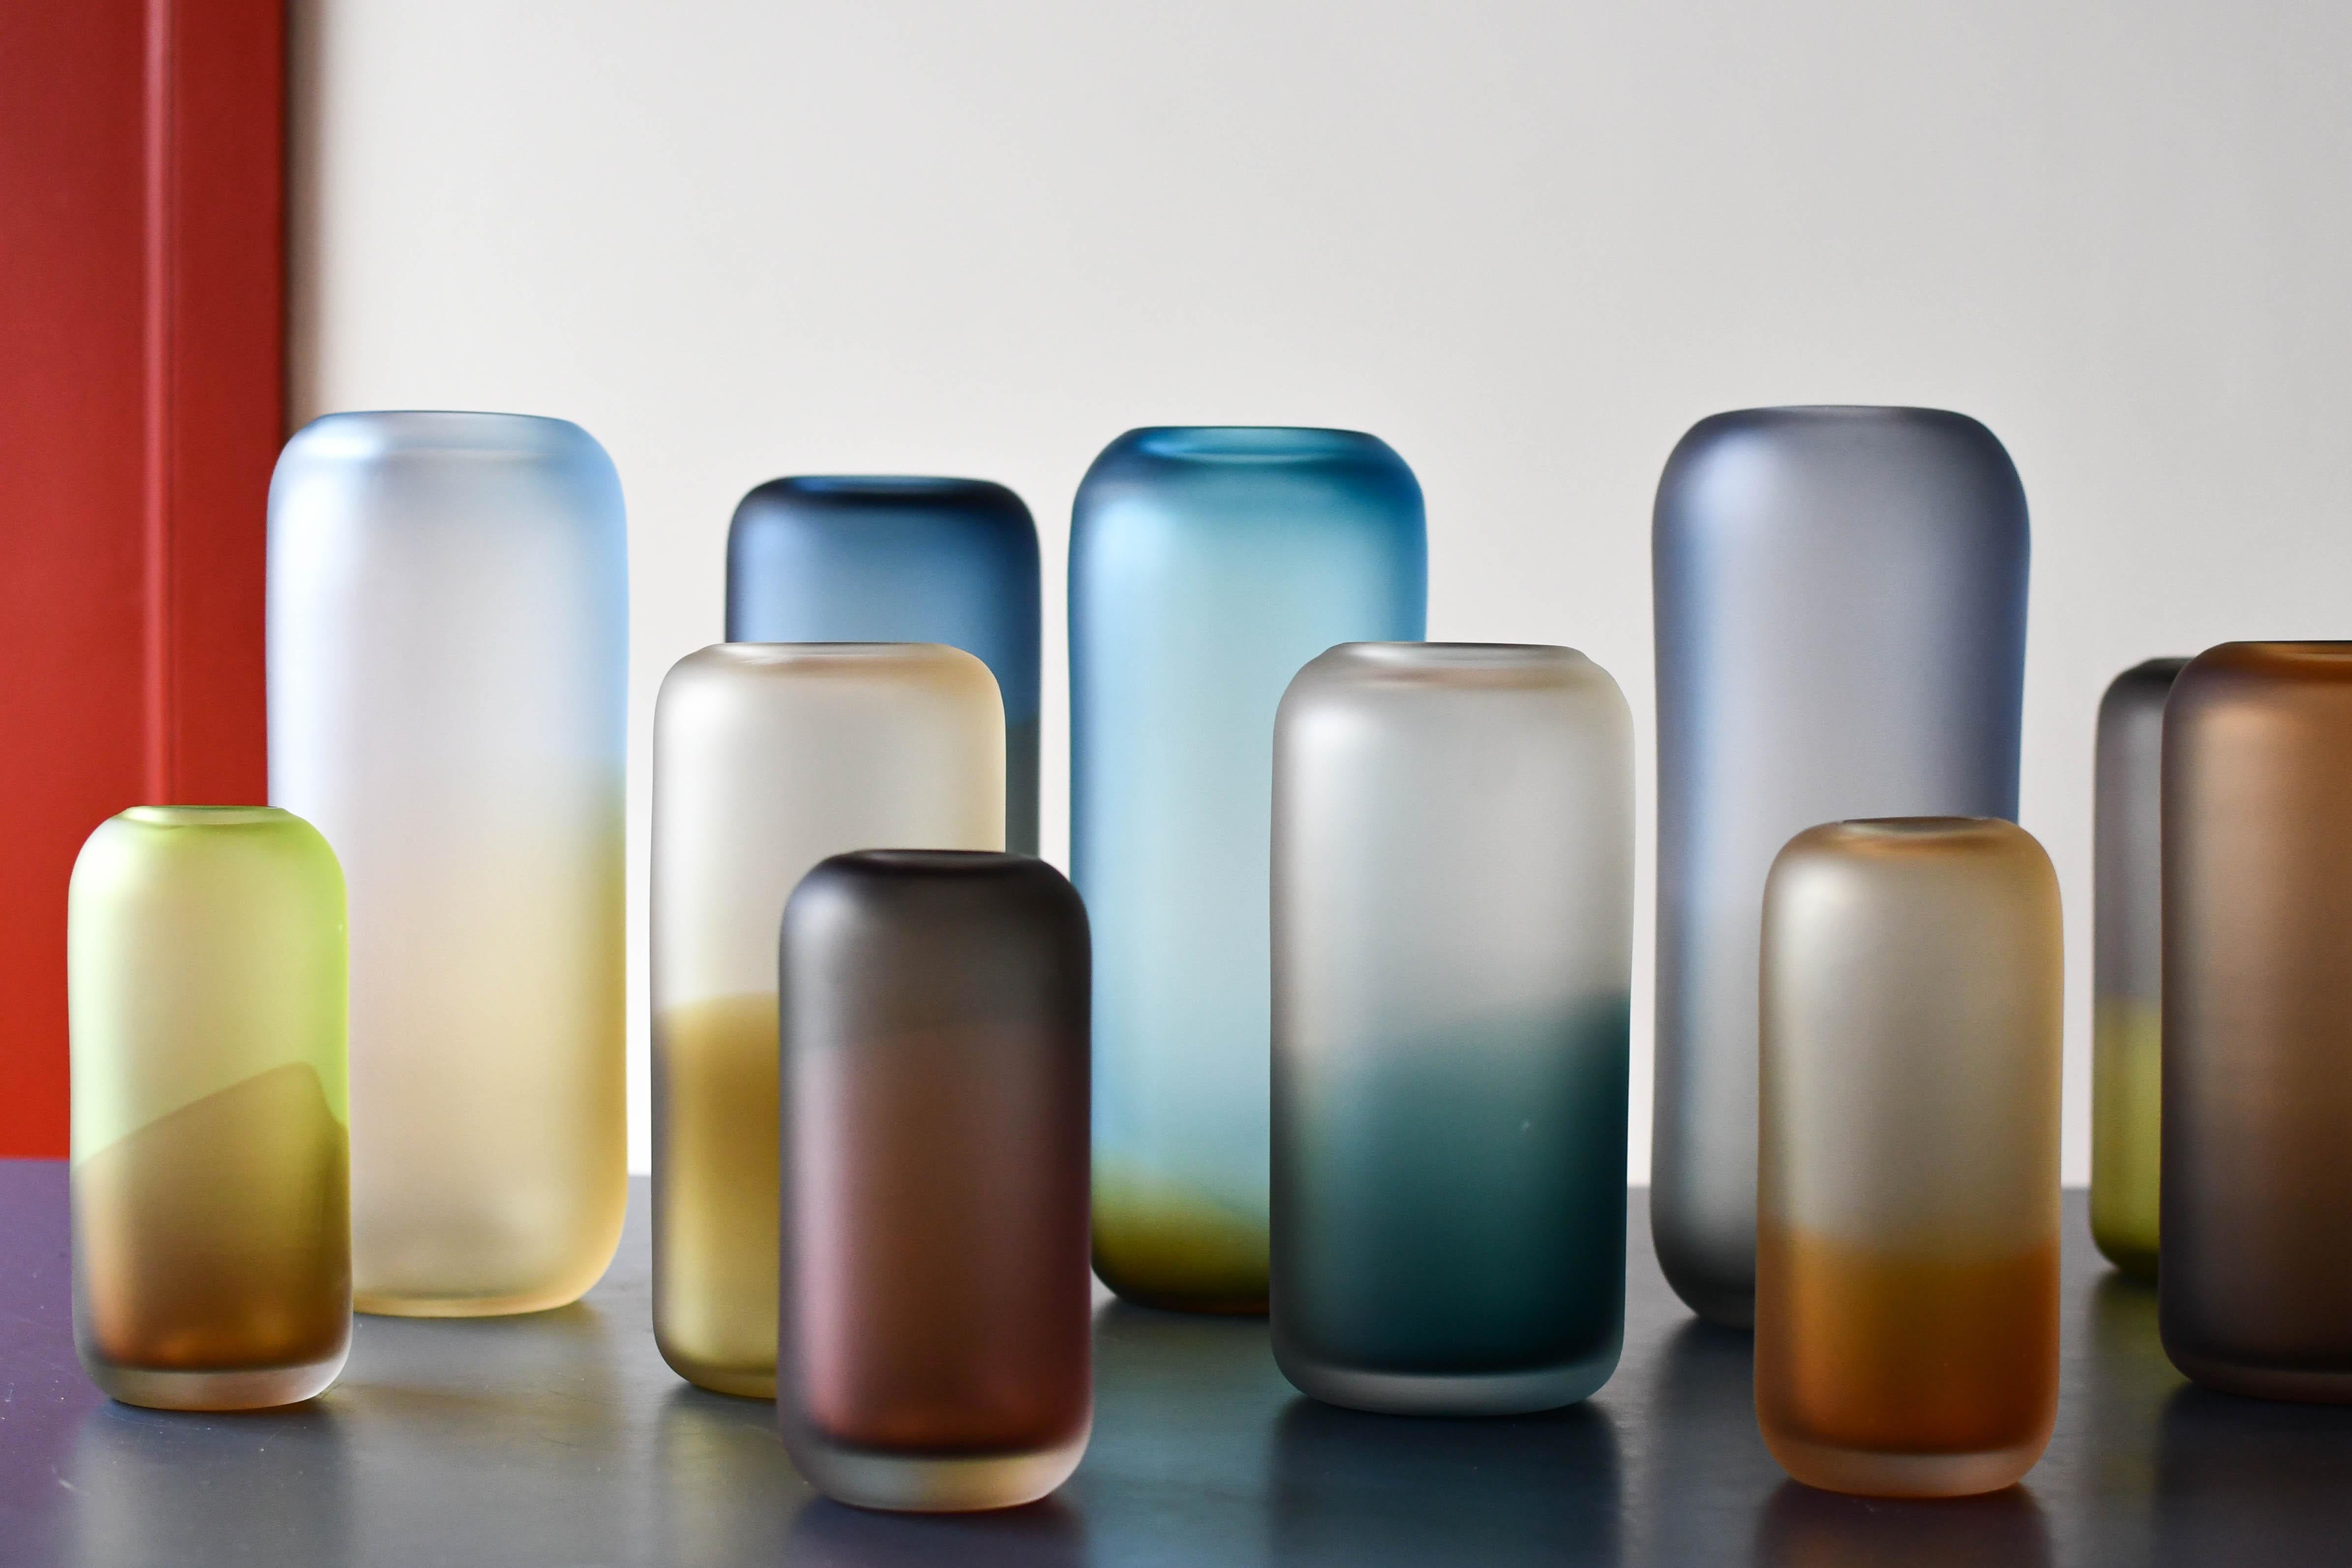 The collection called ‘Gradienti’ is inspired by the infinite colour nuances of the sky. The technique used to make these vases is called ‘sfumato’, where the goal is to achieve imperceptible transitions between hues of soft colours. 

Because of